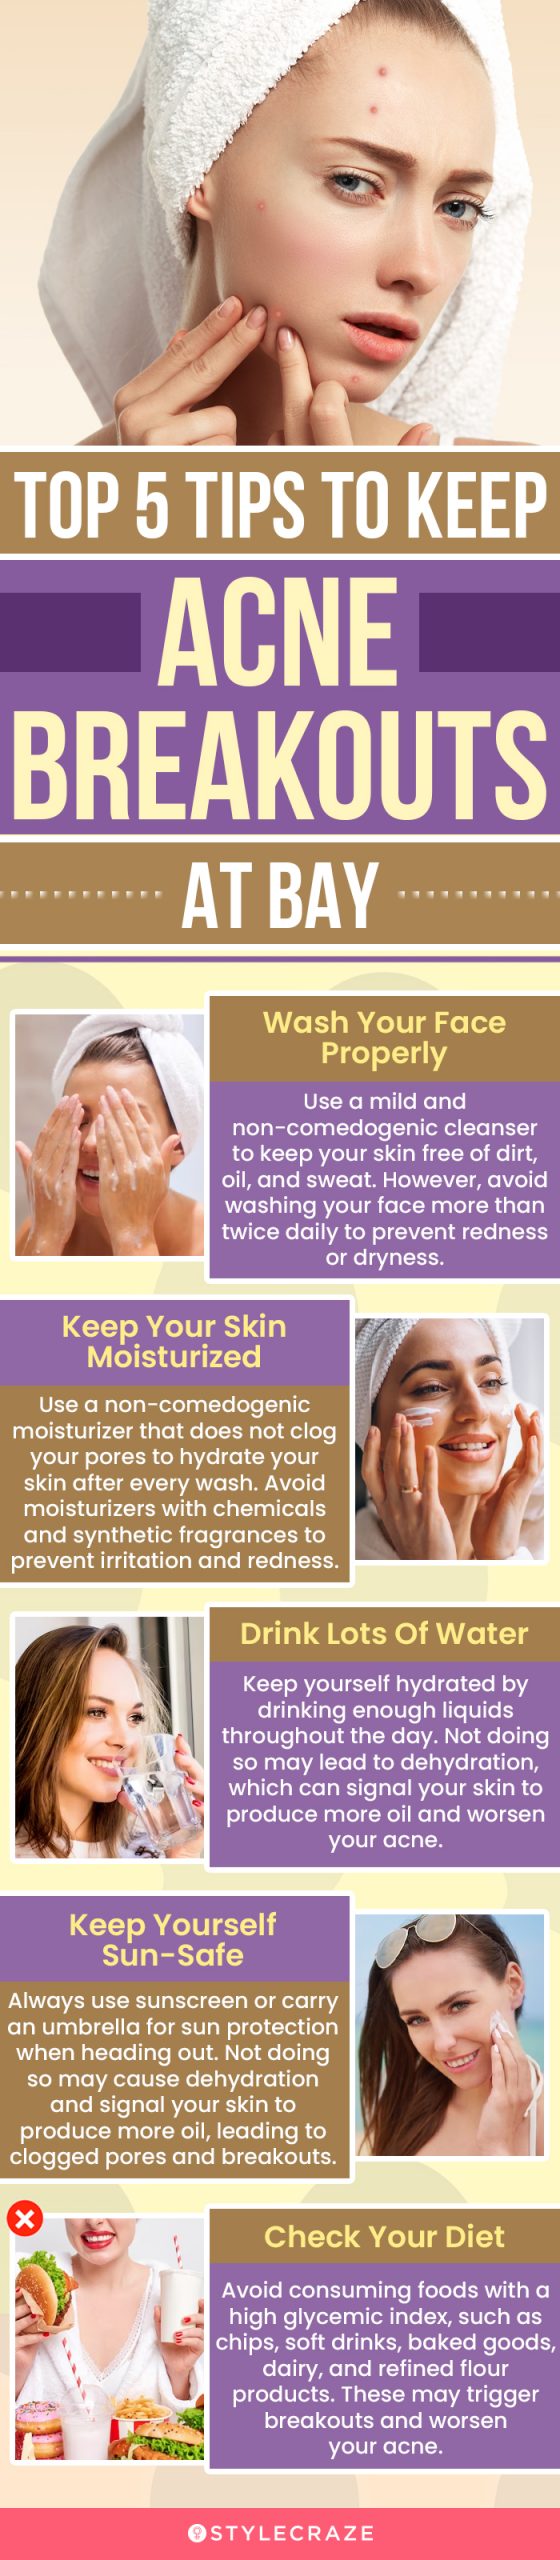 top 5 tips to keep pimples and acne at bay (infographic)